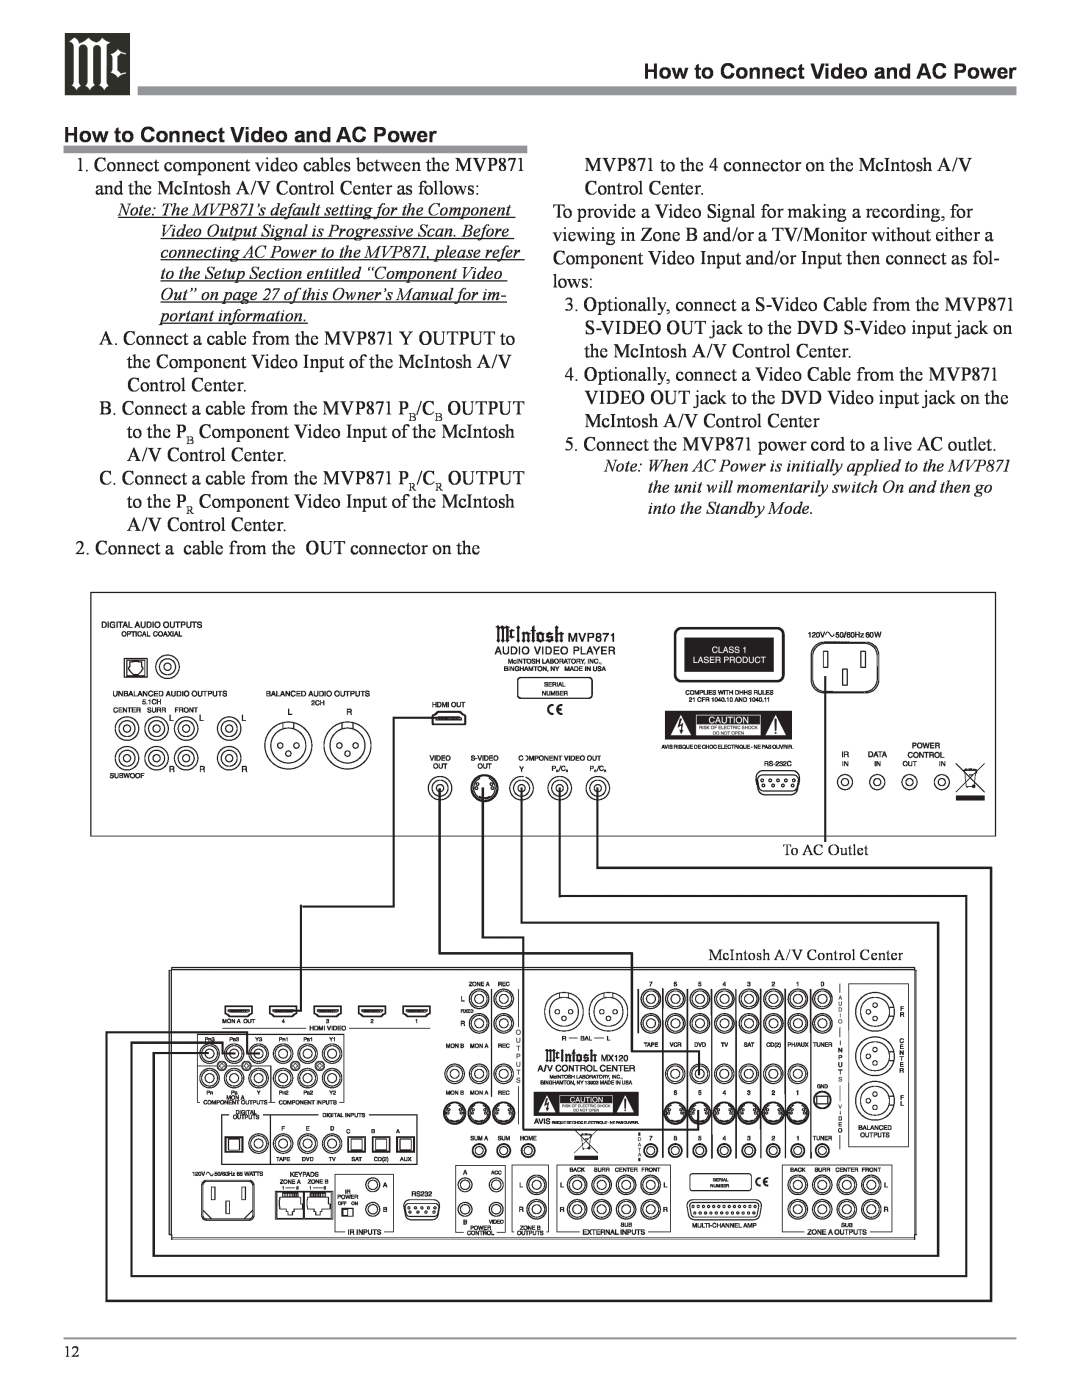 McIntosh MVP871 owner manual How to Connect Video and AC Power 